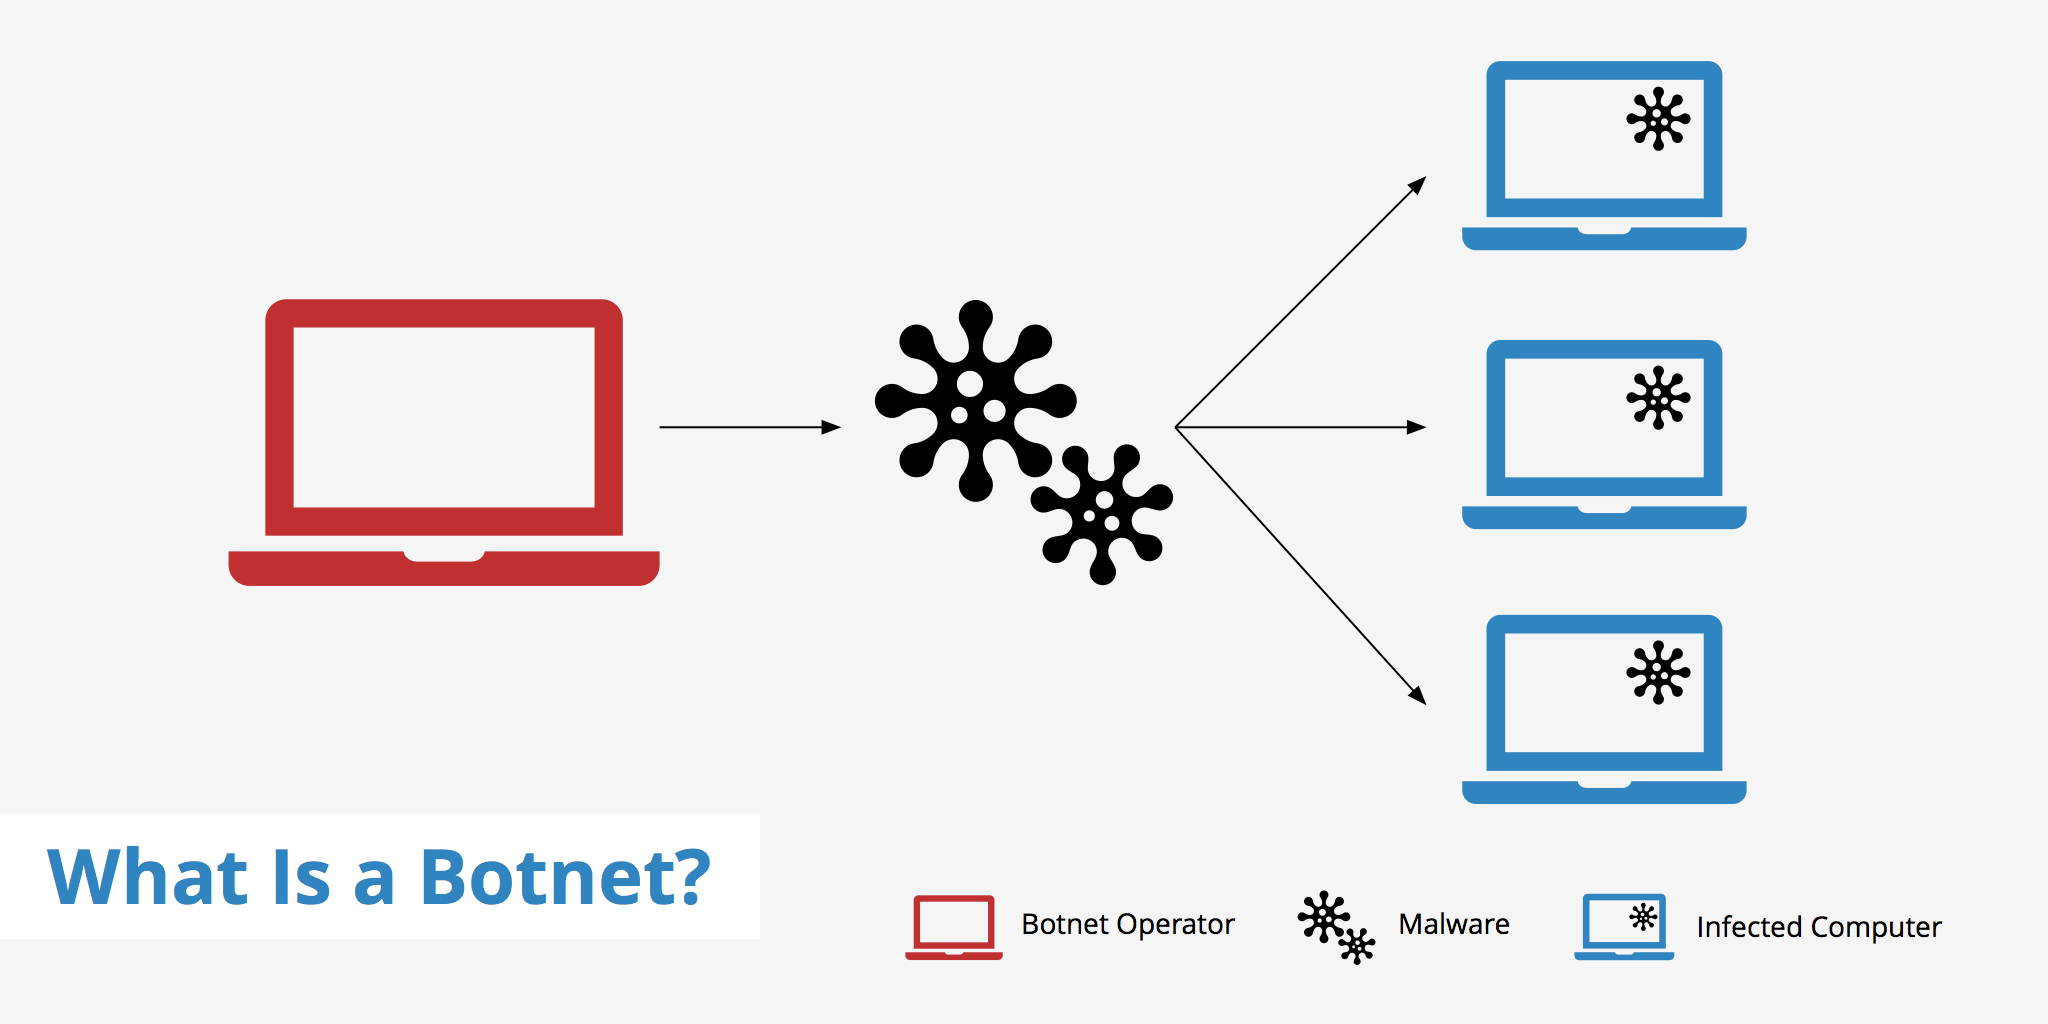 What Is a Botnet?